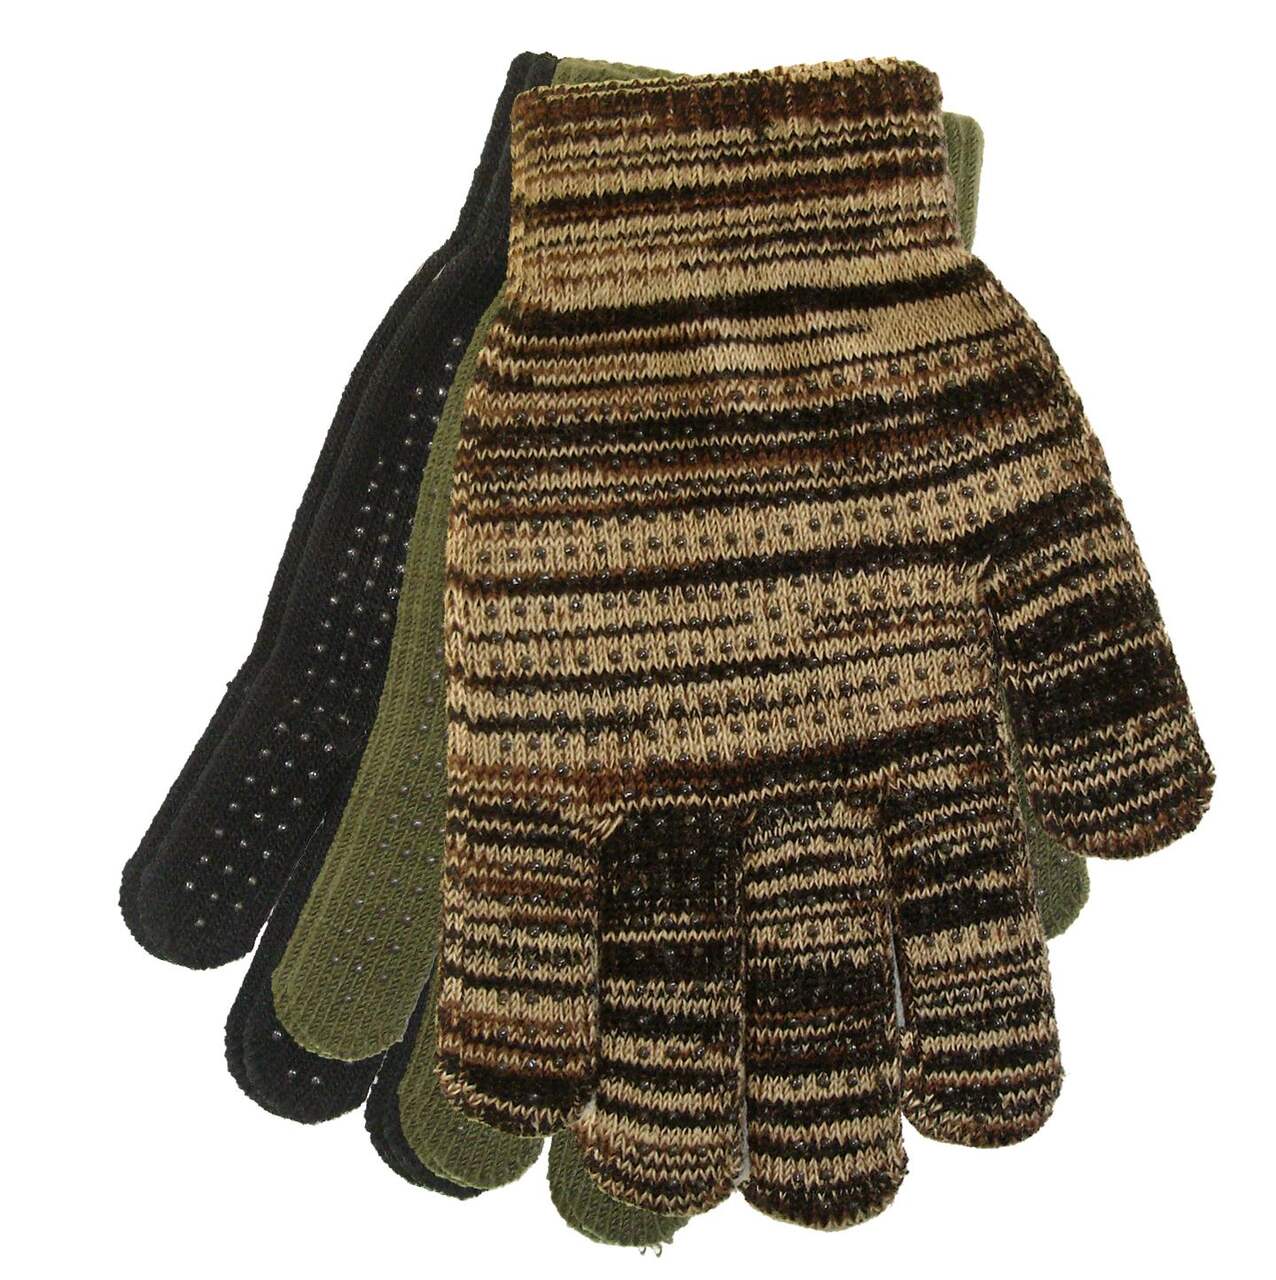 Knit Hunting Gloves with Dotted Palm/Fingers for Non-SliP GriP, 3-Pk  Assorted Colours